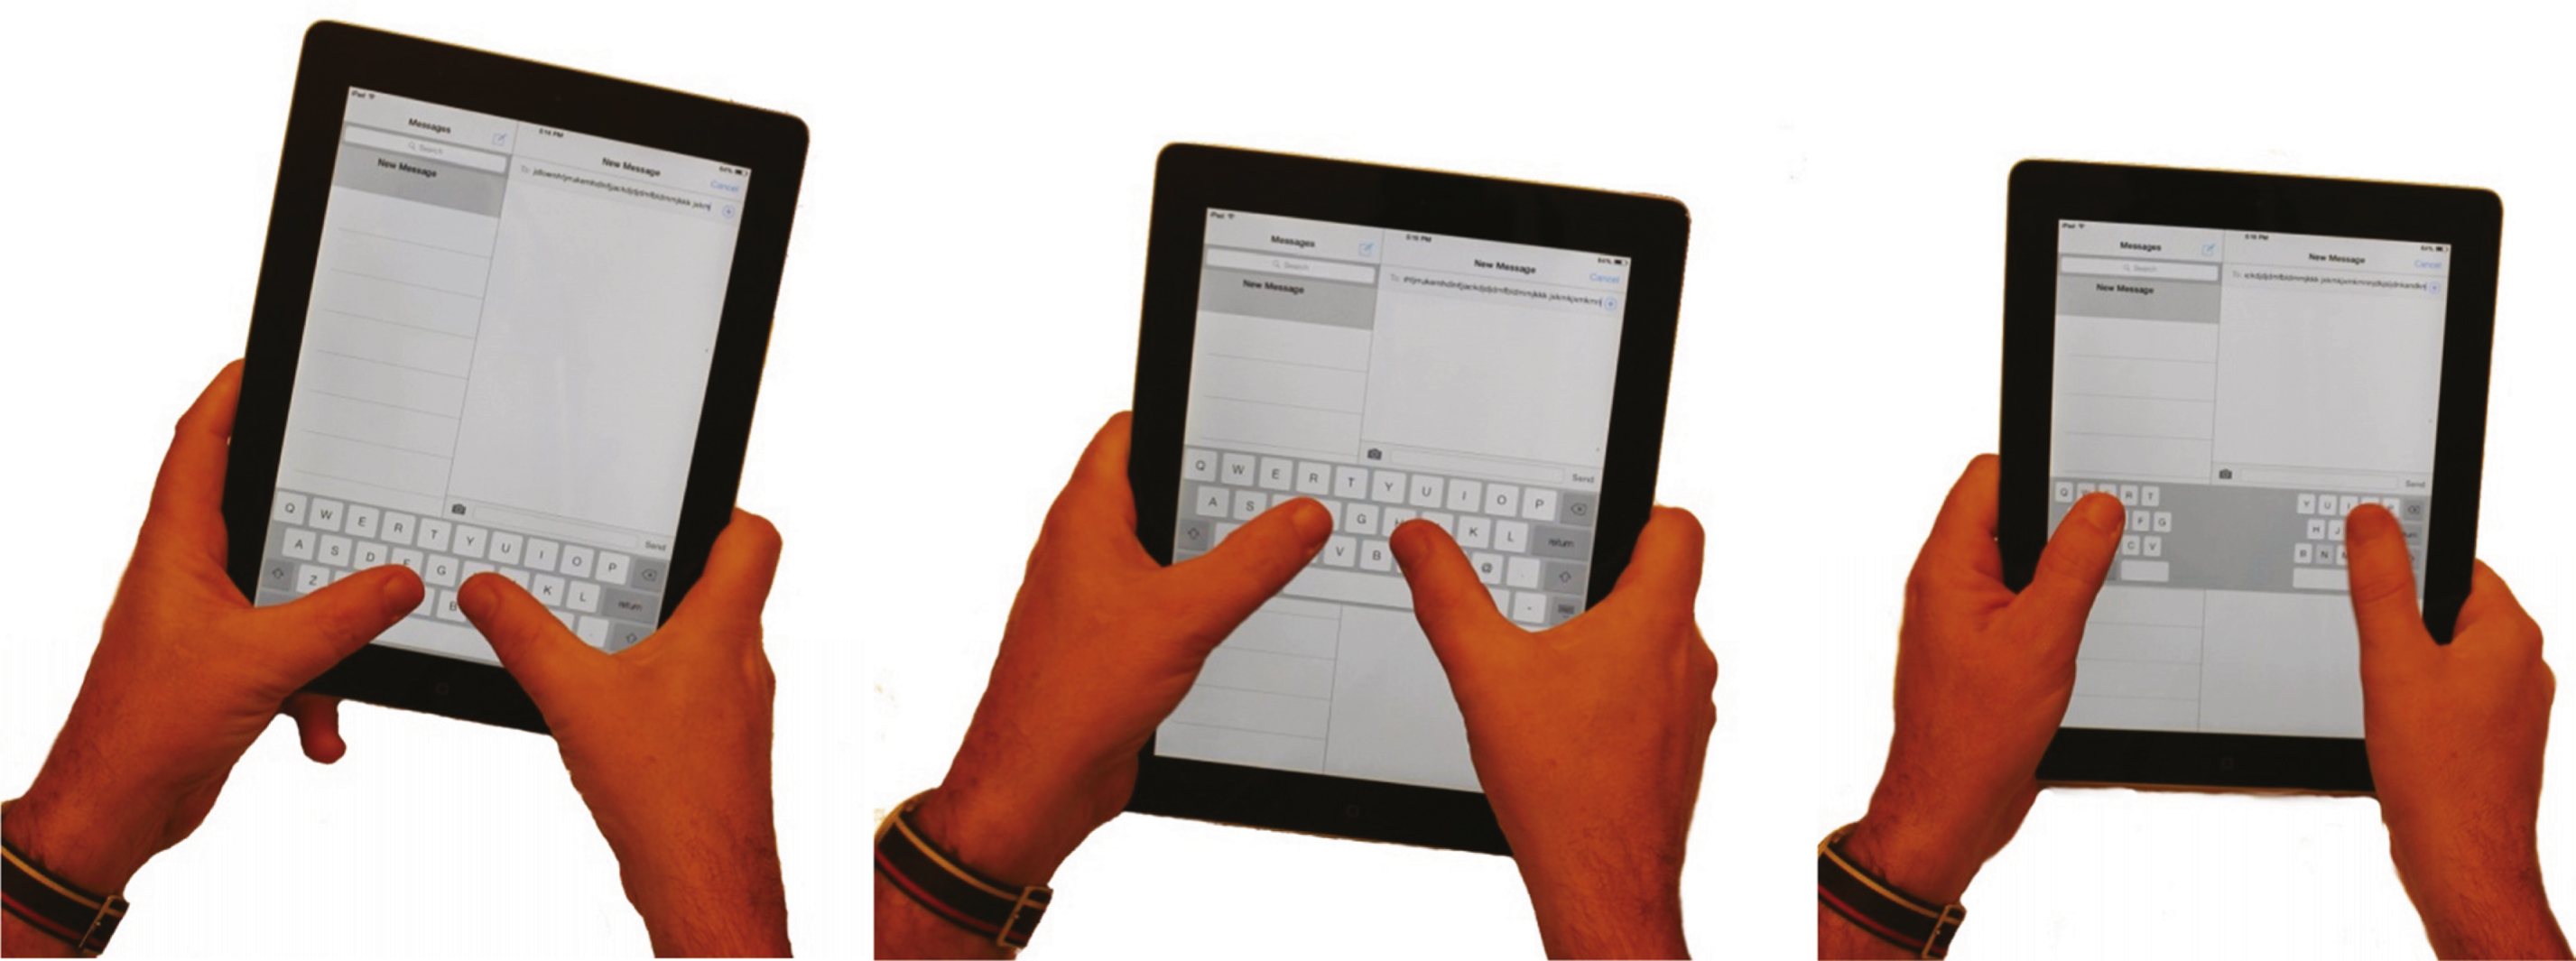 Using two hands to operate a tablet to type on the keyboard is often associated with wrist extension, wrist ulnar deviation, and extension of the thumb joints. Moving the keyboard up into the middle of the tablet (middle) and using the split keyboard function (right) improves postures and comfort.